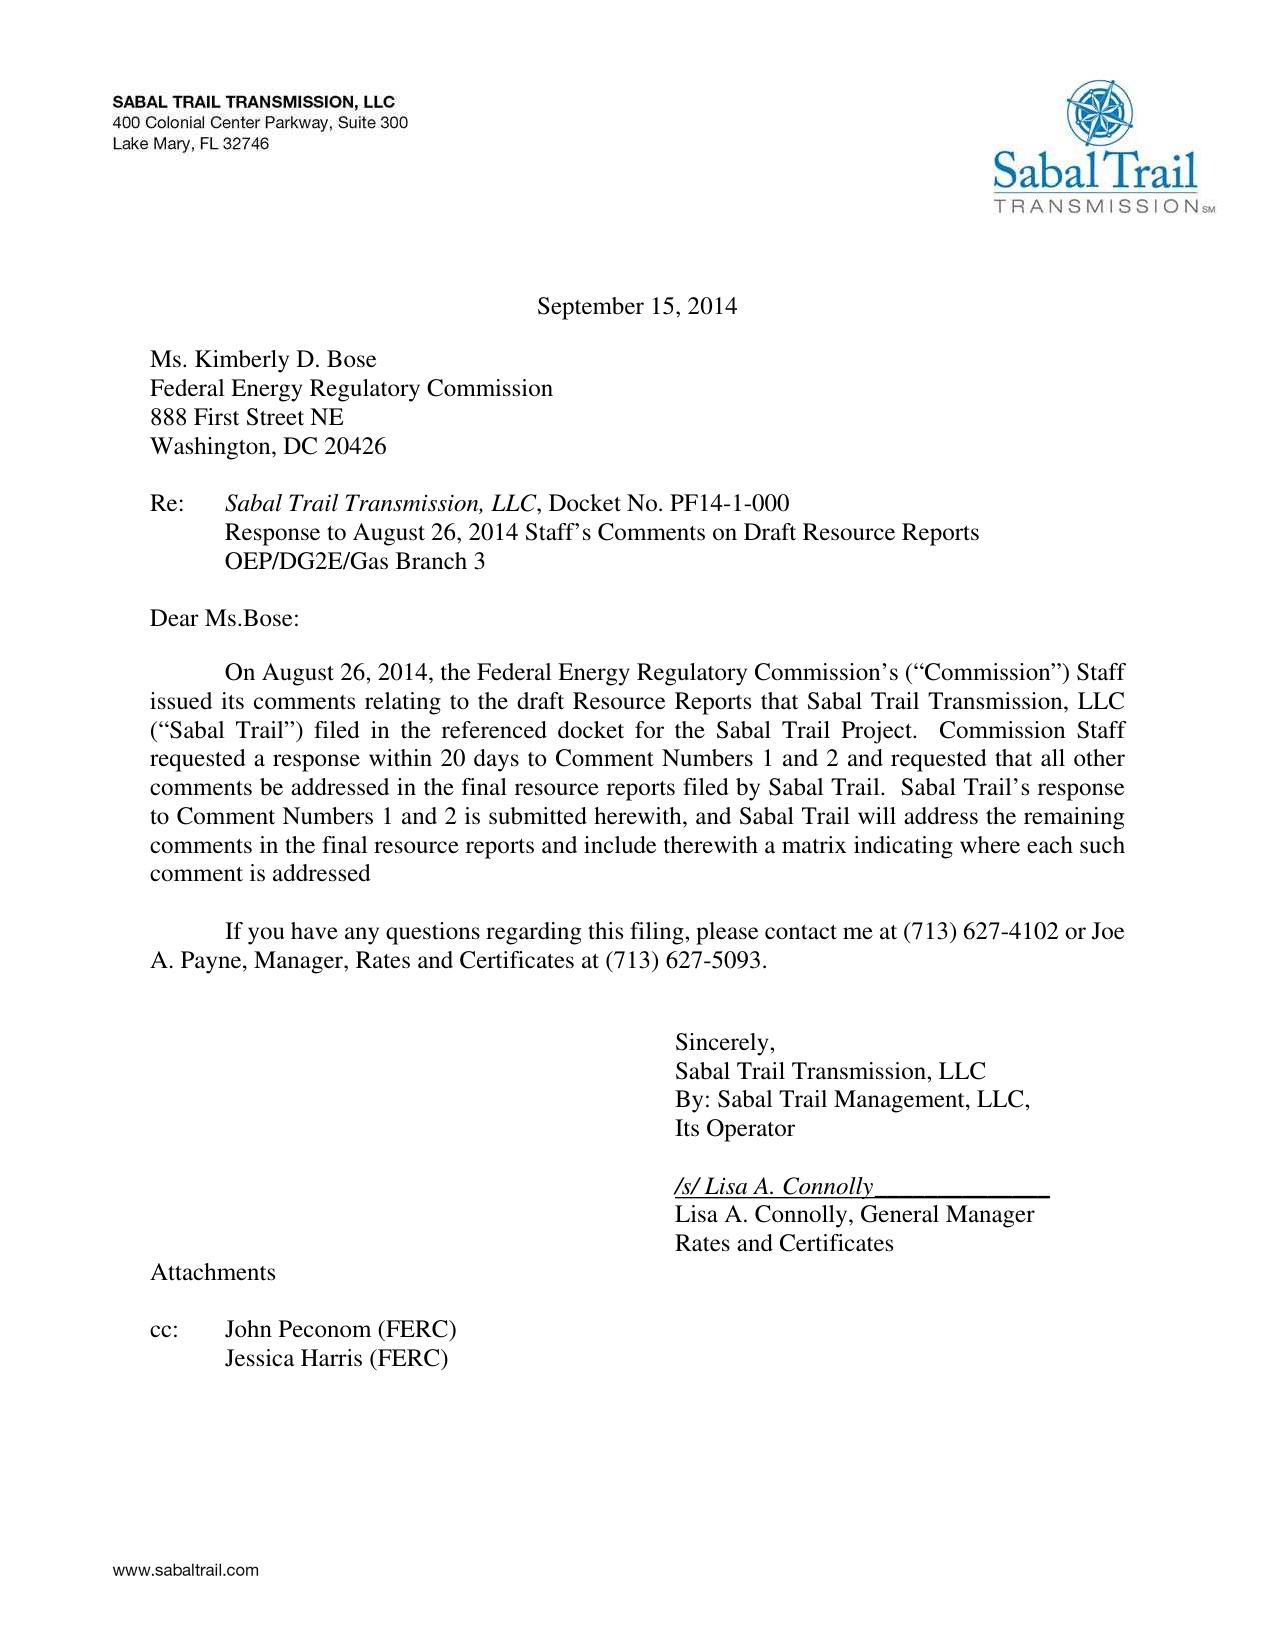 1275x1650 Lisa A. Connelly (STT) to John Peconom (FERC), in Response to FERC directive of 26 August 2014, by Sabal Trail Transmission, for SpectraBusters.org, 15 September 2014